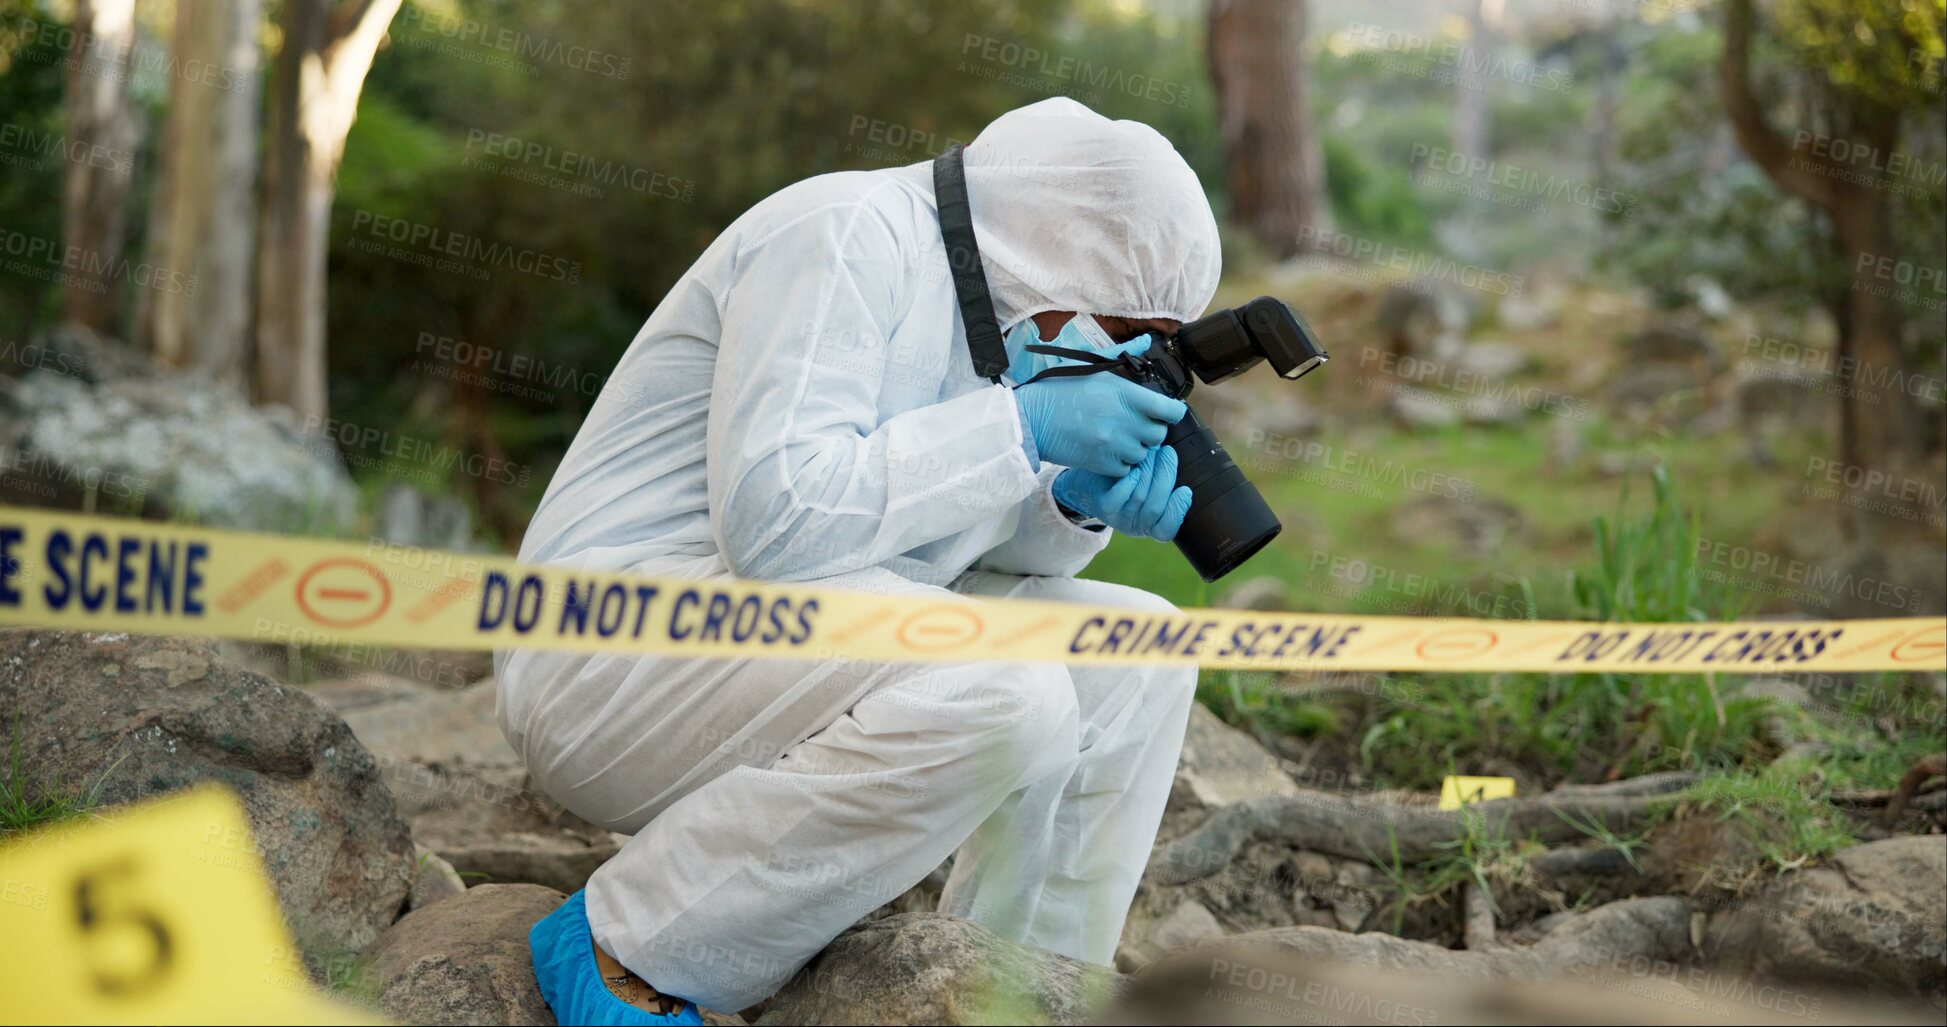 Buy stock photo Forensic, photographer and police tape at crime scene for investigation in forest with evidence and safety hazmat.
Csi quarantine, expert investigator and pictures for observation and case research